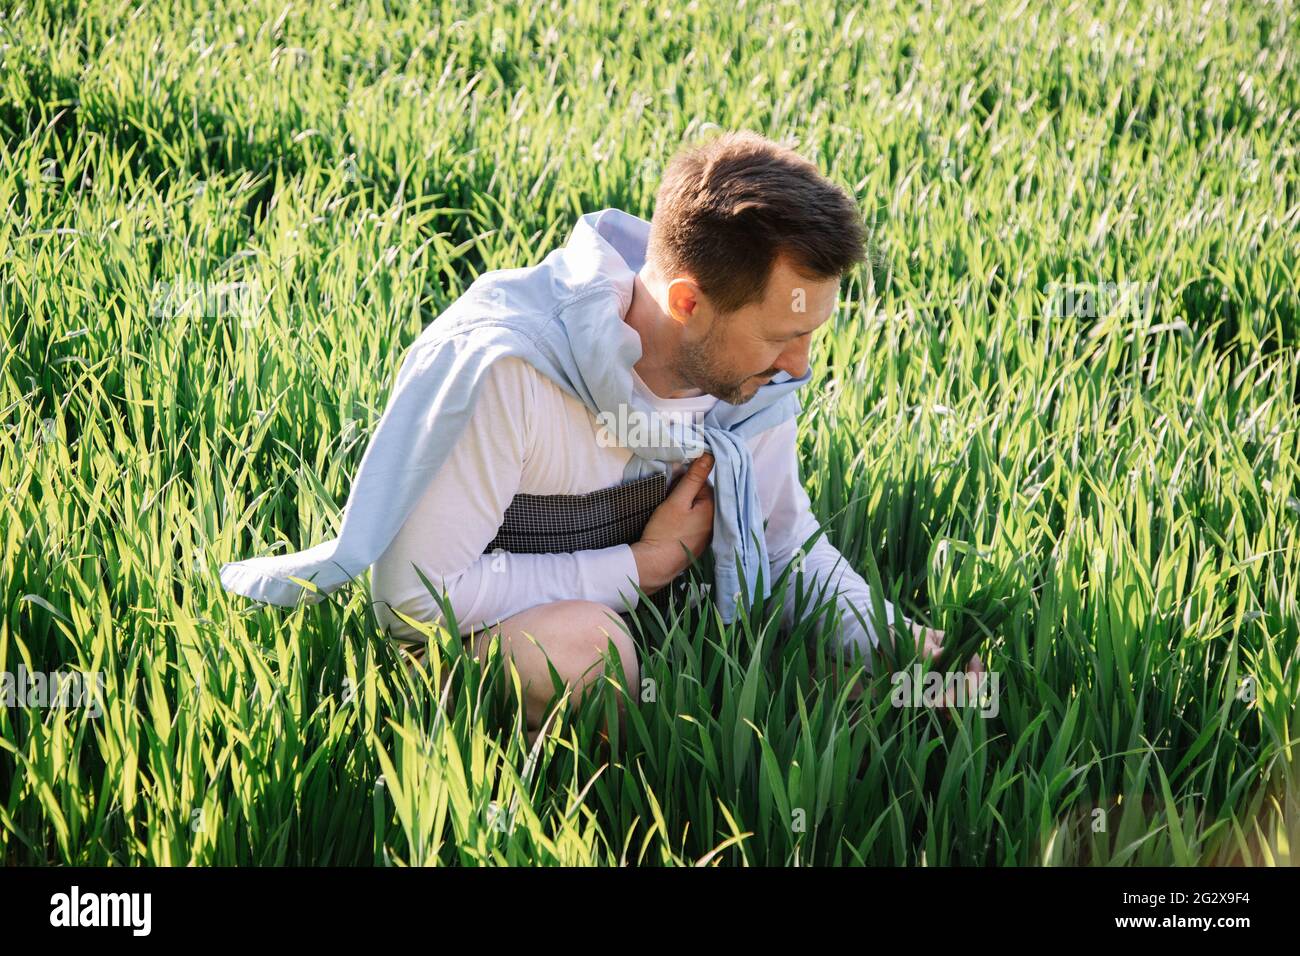 Young farmer with folder under his arm sitting in field 40 years old checking his forage crop, small bussiness concept photo Stock Photo